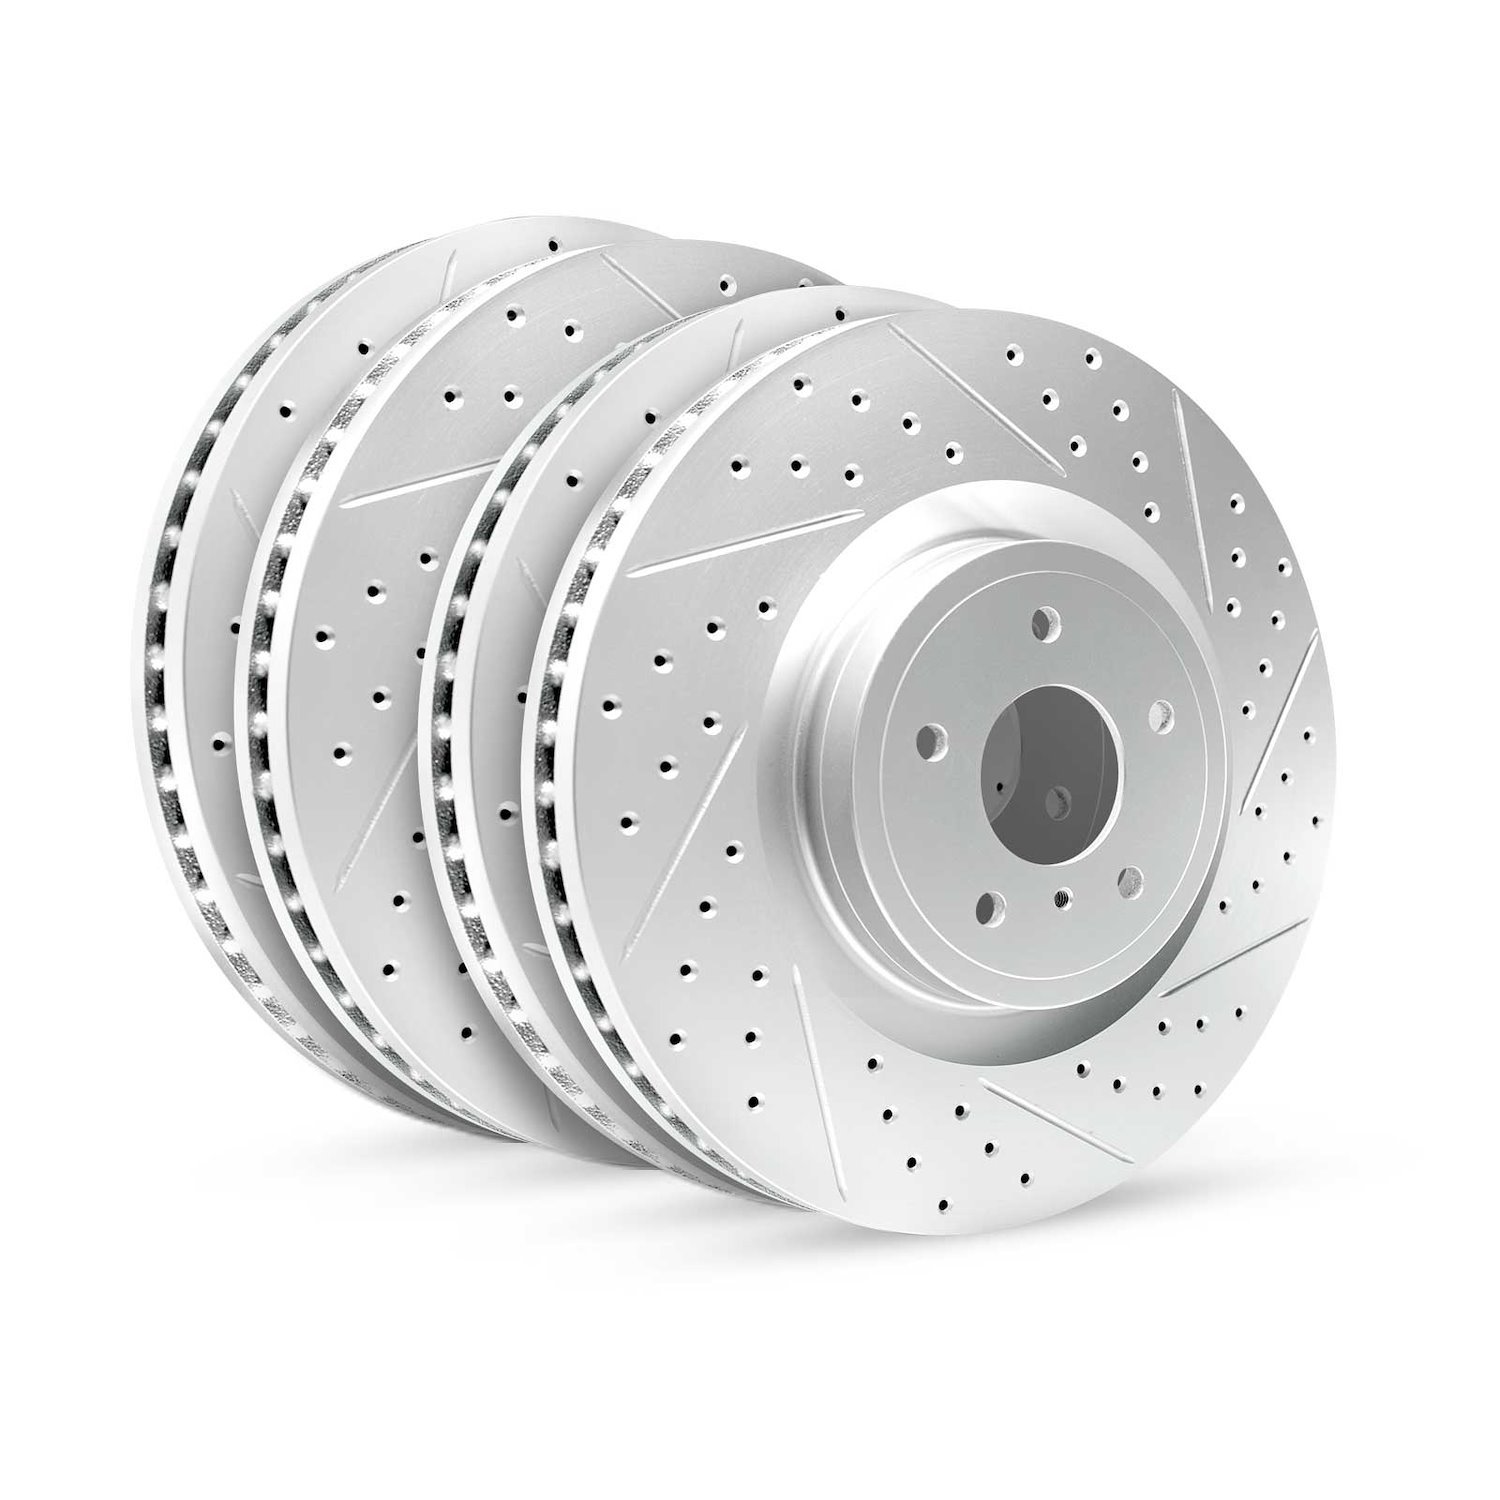 GEO-Carbon Drilled/Slotted Rotors, 1999-2019 Ford/Mazda,